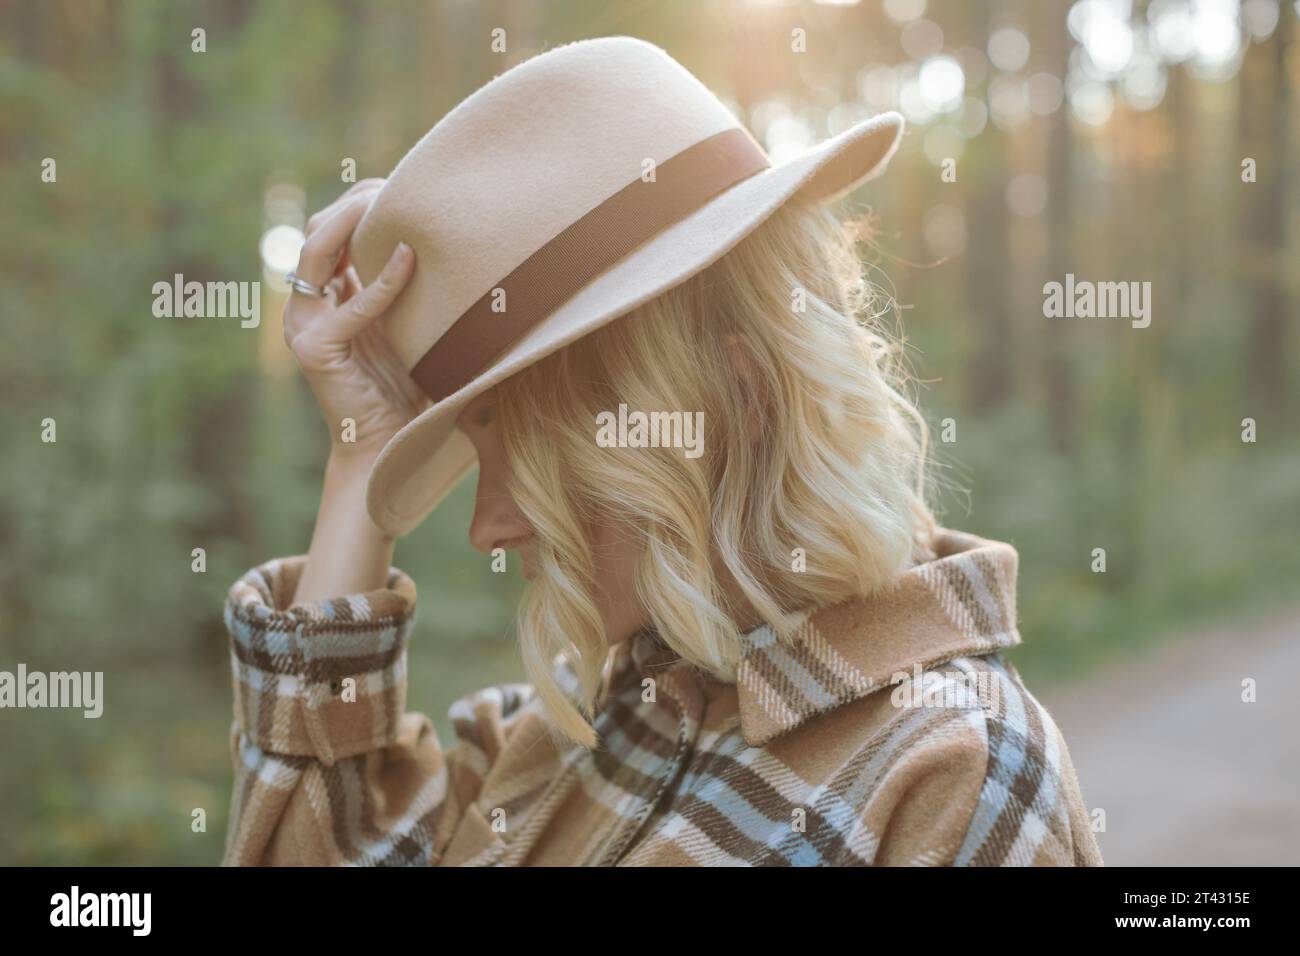 Portrait of a stylish young woman standing in a forest with her hand on her hat, Belarus Stock Photo